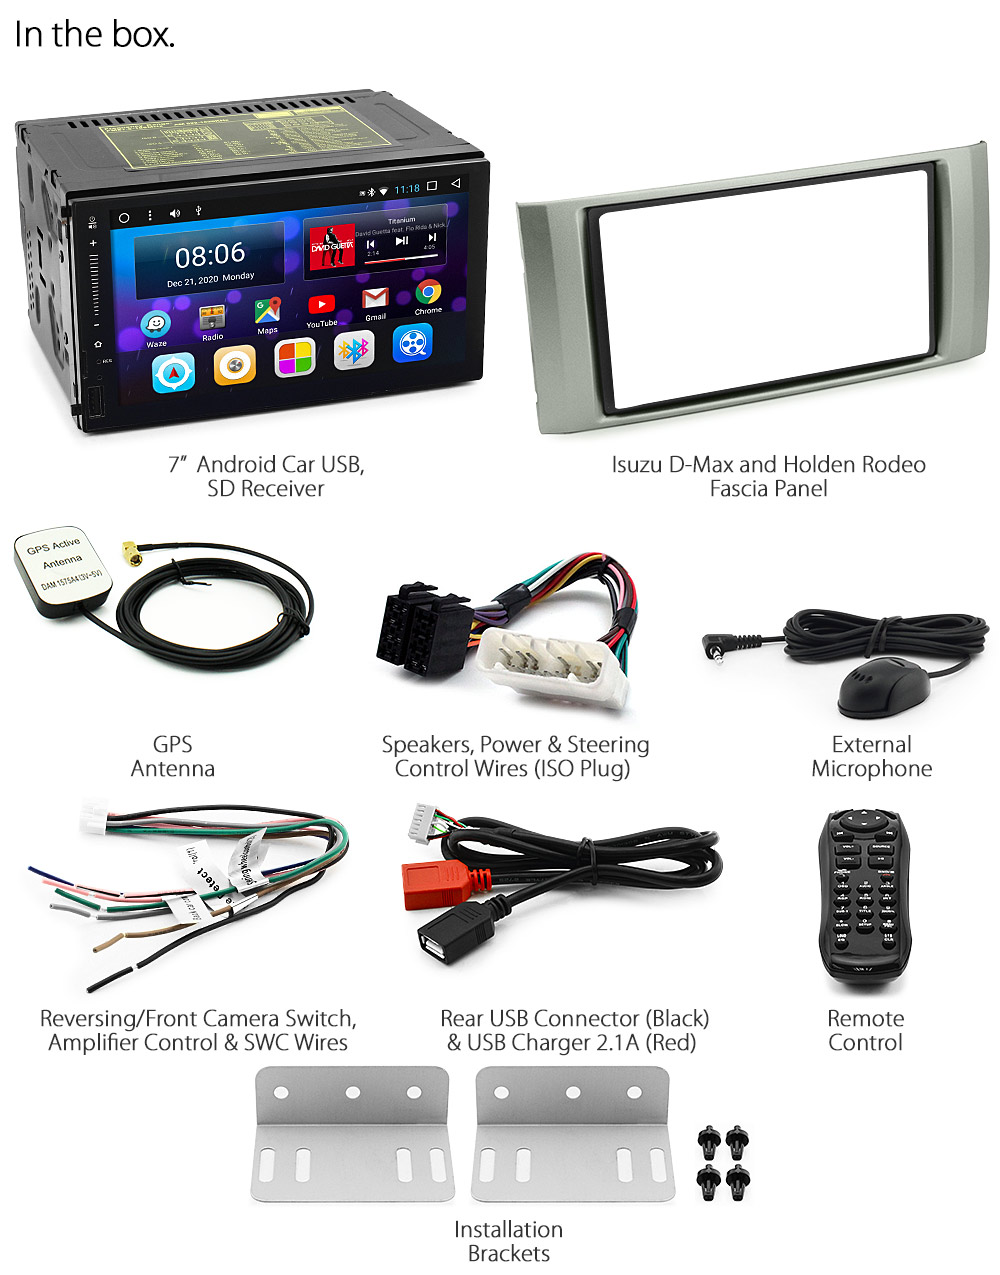 ISZ16AND GPS 7-inch Aftermarket Isuzu D-Max 1st Generation Europe European Australia Year 2006 2007 2008 2009 2010 2011 2012 Holden Rodeo Chevrolet Latest Australia UK European USA Original Universal Double DIN Android 7.1 Nougat car USB Charger 2.1A SD player radio stereo head unit details External and Internal Microphone Bluetooth Europe Sat Nav Navi Plug and Play Fascia Facia Kit ISO Plug Wiring Harness Steering Wheel Control SWC Patch Lead Connects2 Free Reversing Camera Album Art ID3 Tag RMVB MP3 MP4 AVI MKV Full High Definition FHD Apple AirPlay Air Play MirrorLink Mirror Link 1080p DAB+ Digital Radio DAB + tunez tunezmart